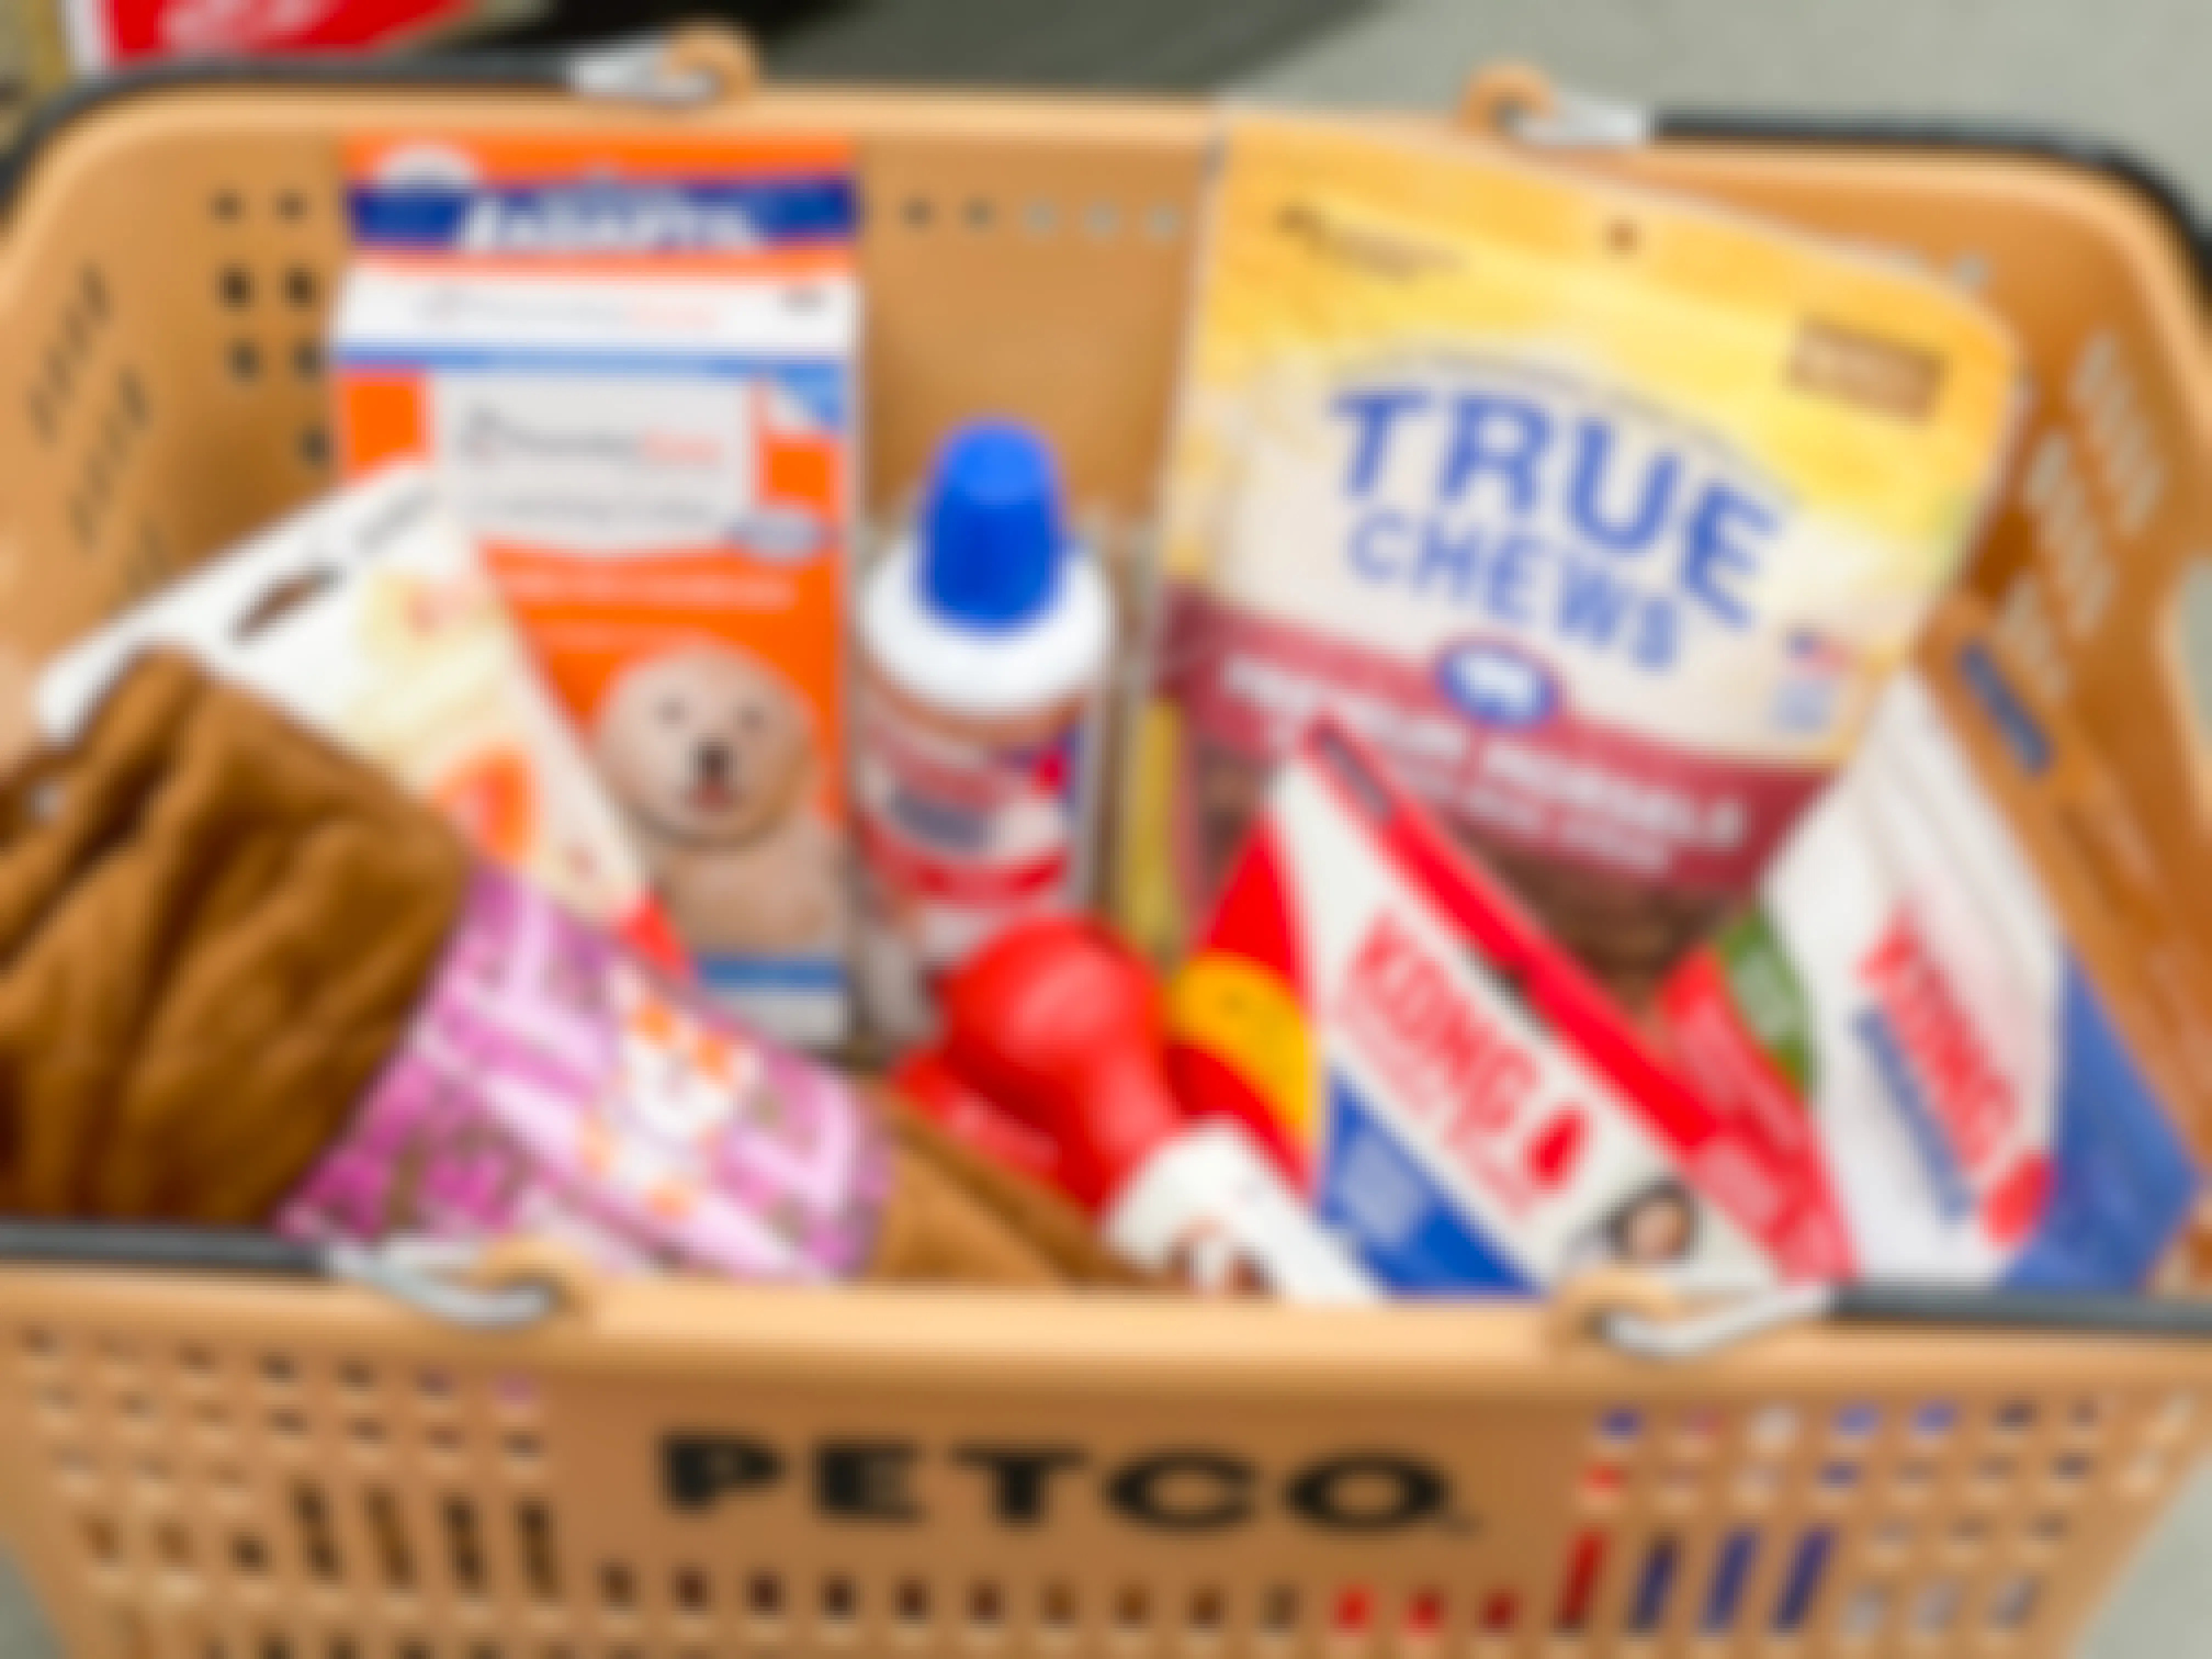 Petco basket with dog toys, dog chews, and other pet supplies